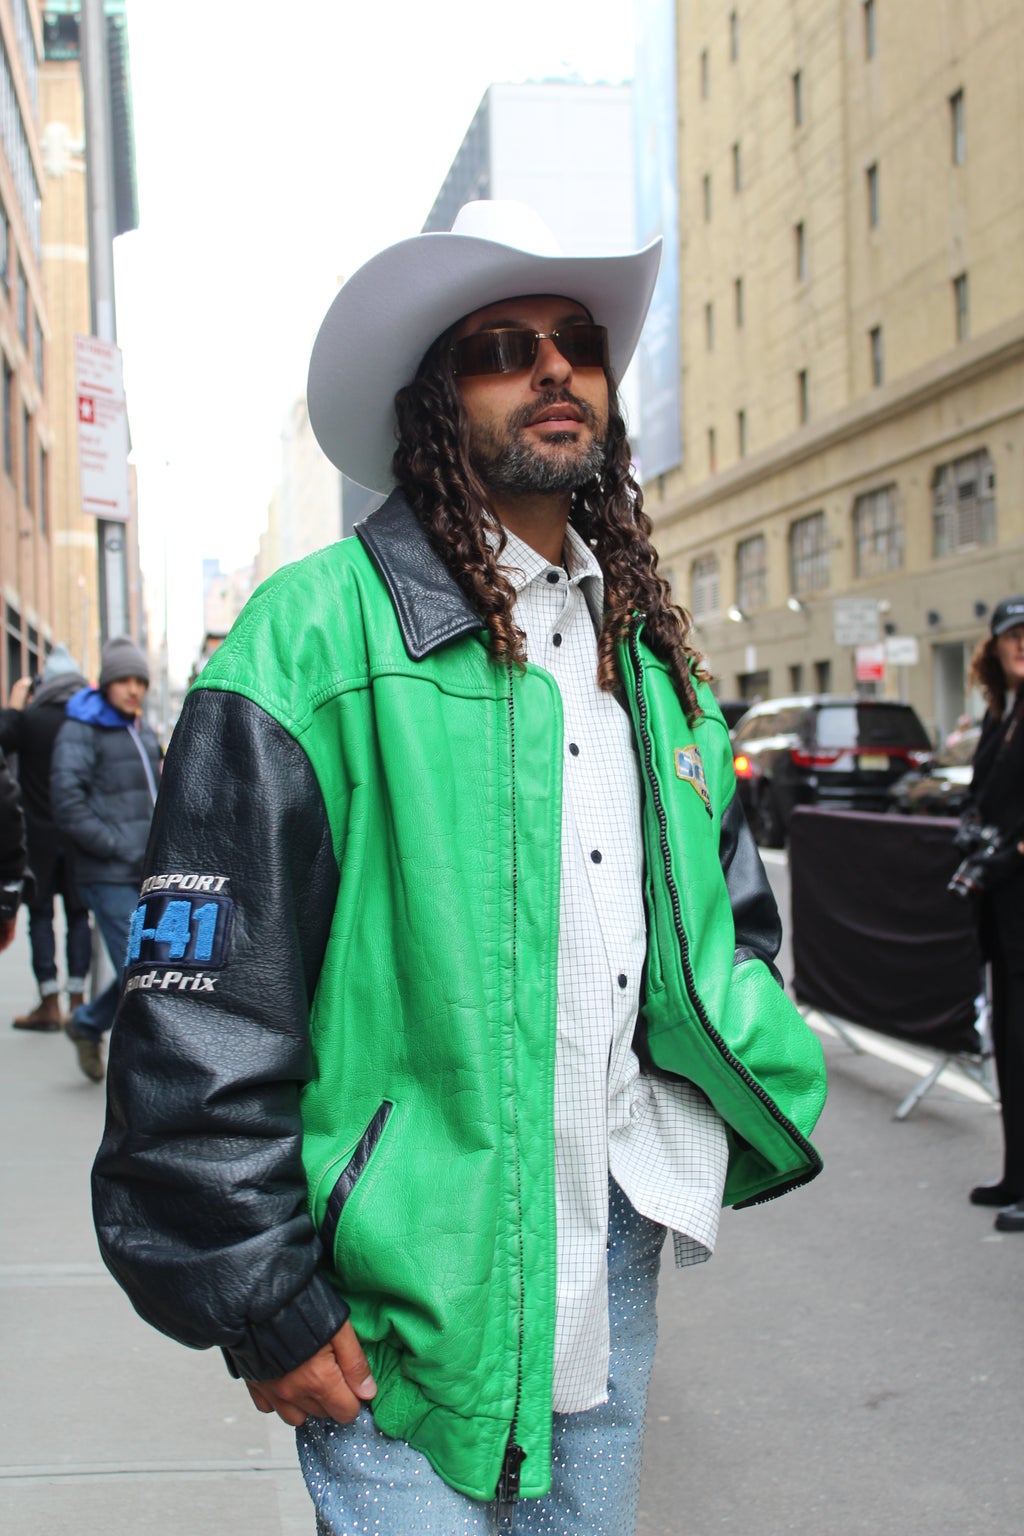 Man in vintage green and black jacket, cowboy hat, and jeans